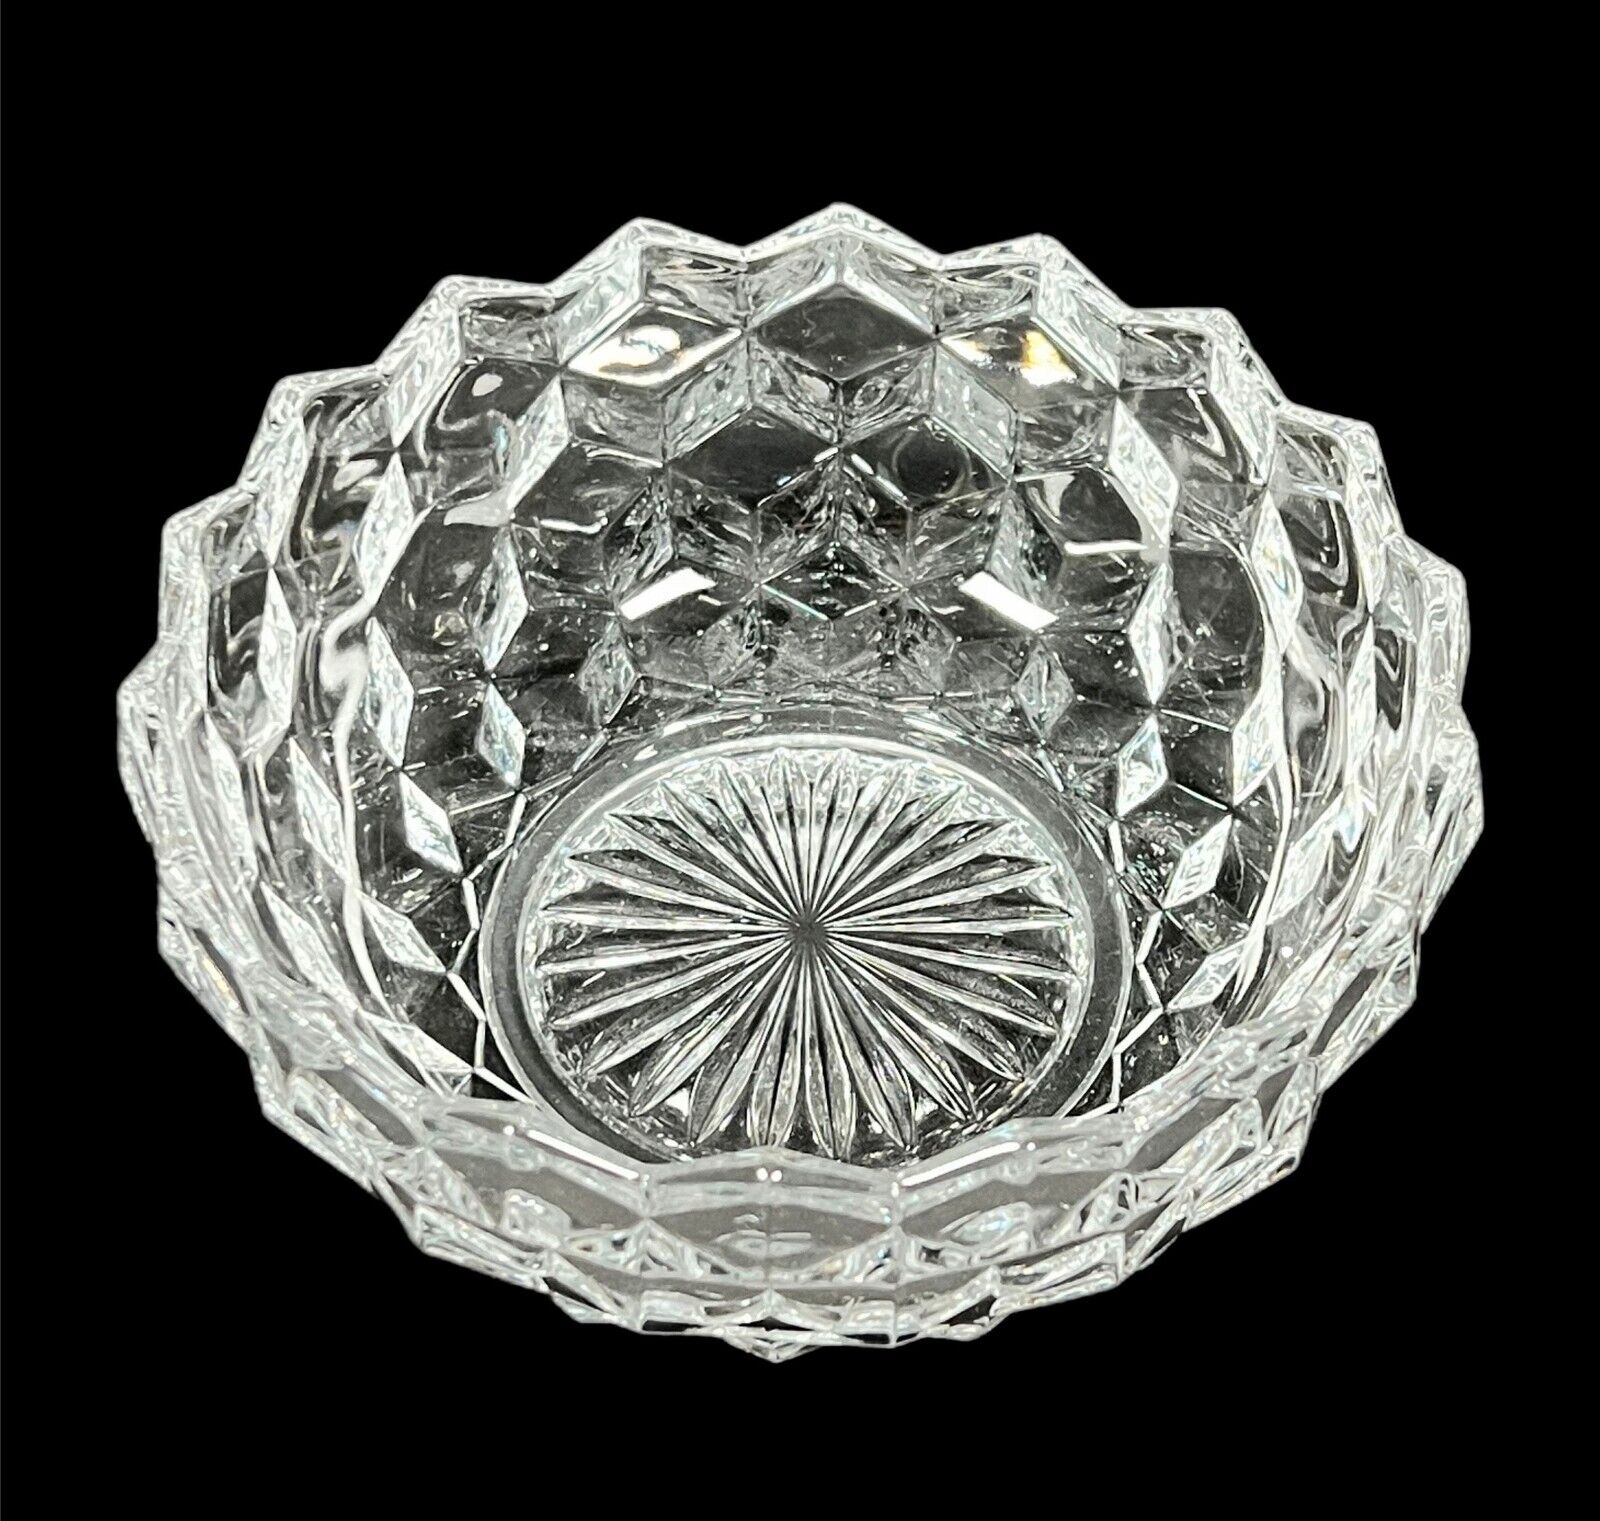 Fostoria American Glass Bowl Elegant Pattern Vintage Made in USA 5 Inches Wide